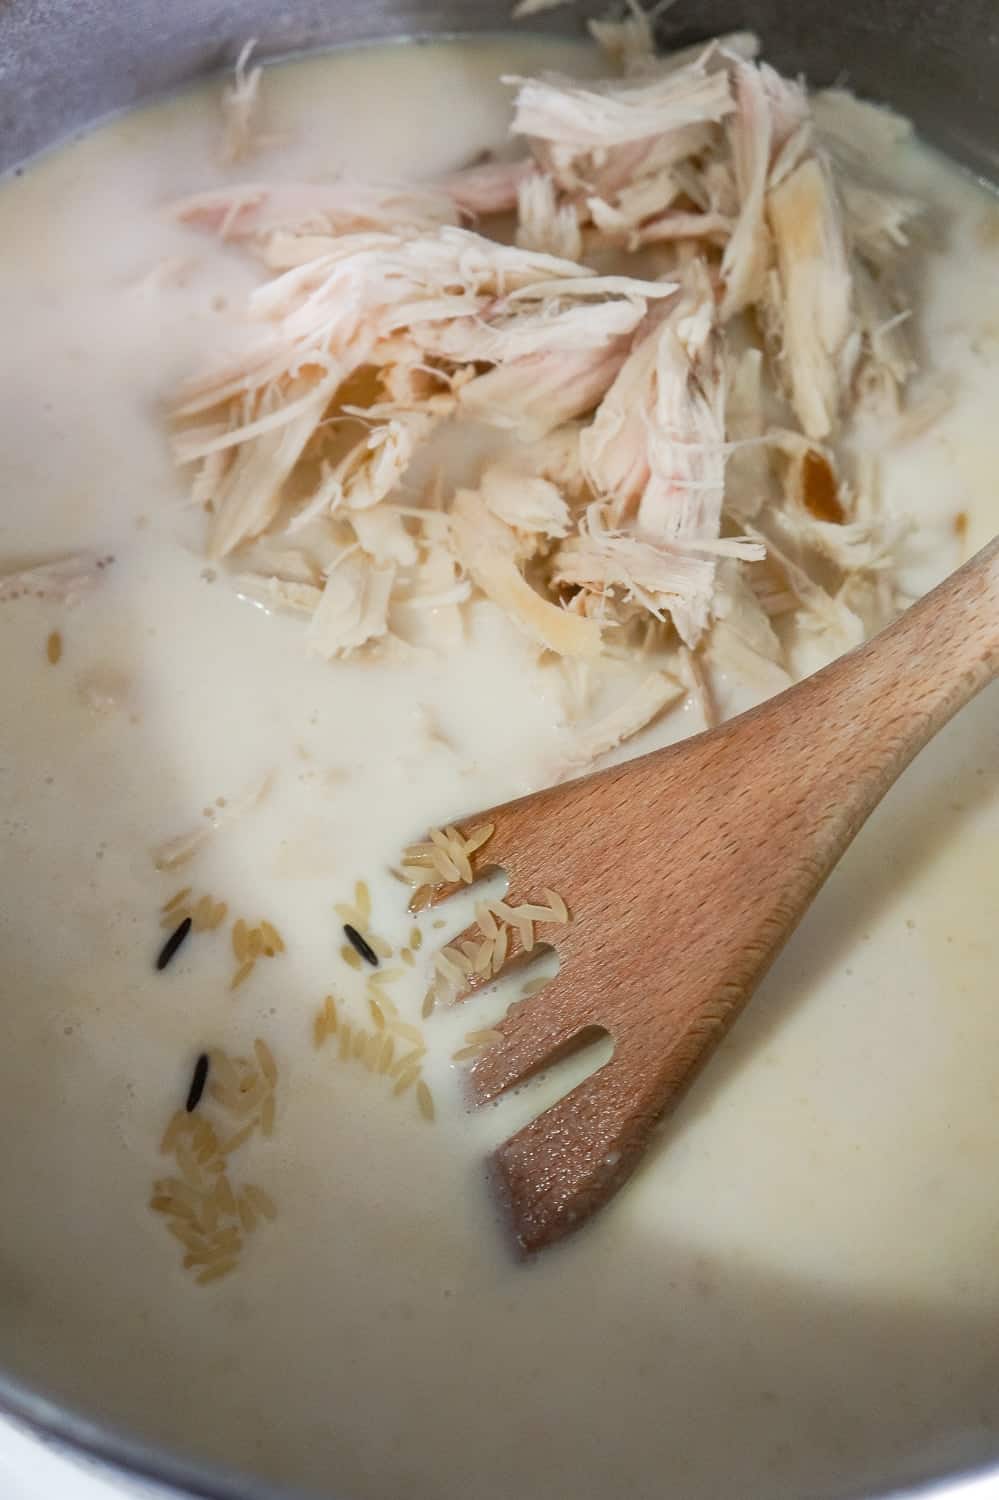 shredded turkey and rice being added to milk and chicken broth mixture